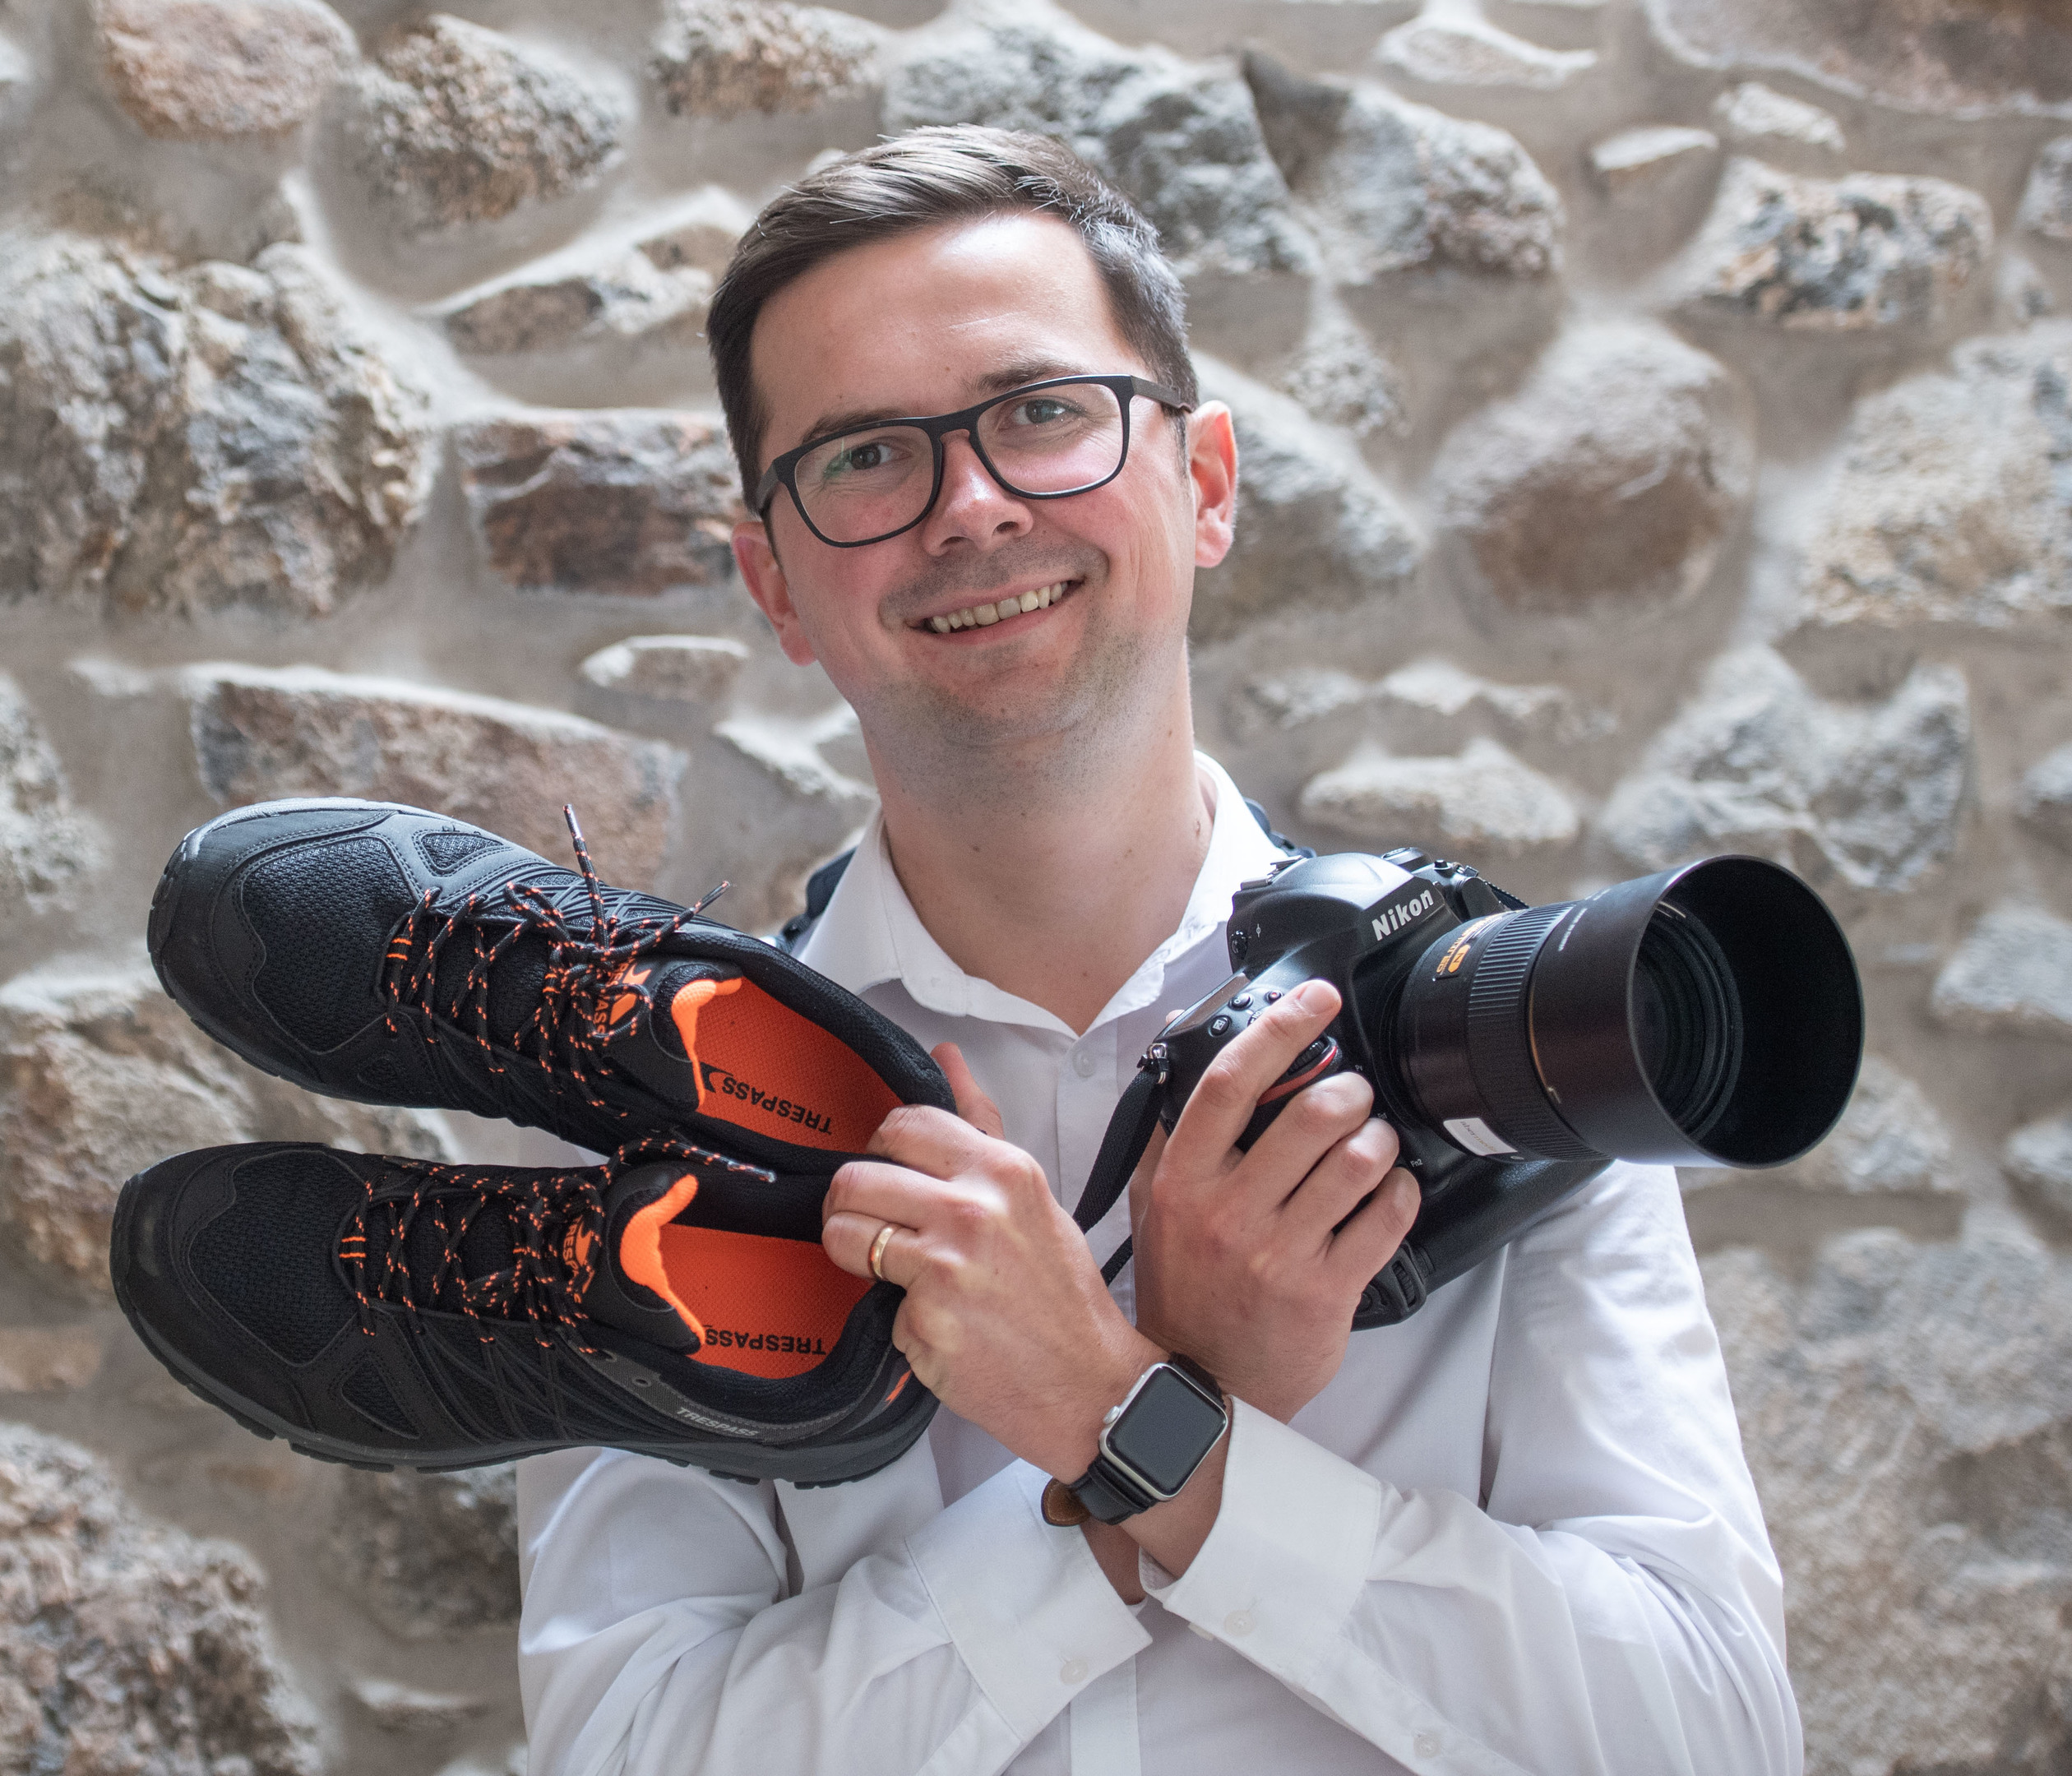 Local freelance photographer Michal Wachucik of Abermedia takes part in Fundraising Trek to walk The Great Wall of China with Archie Foundation.